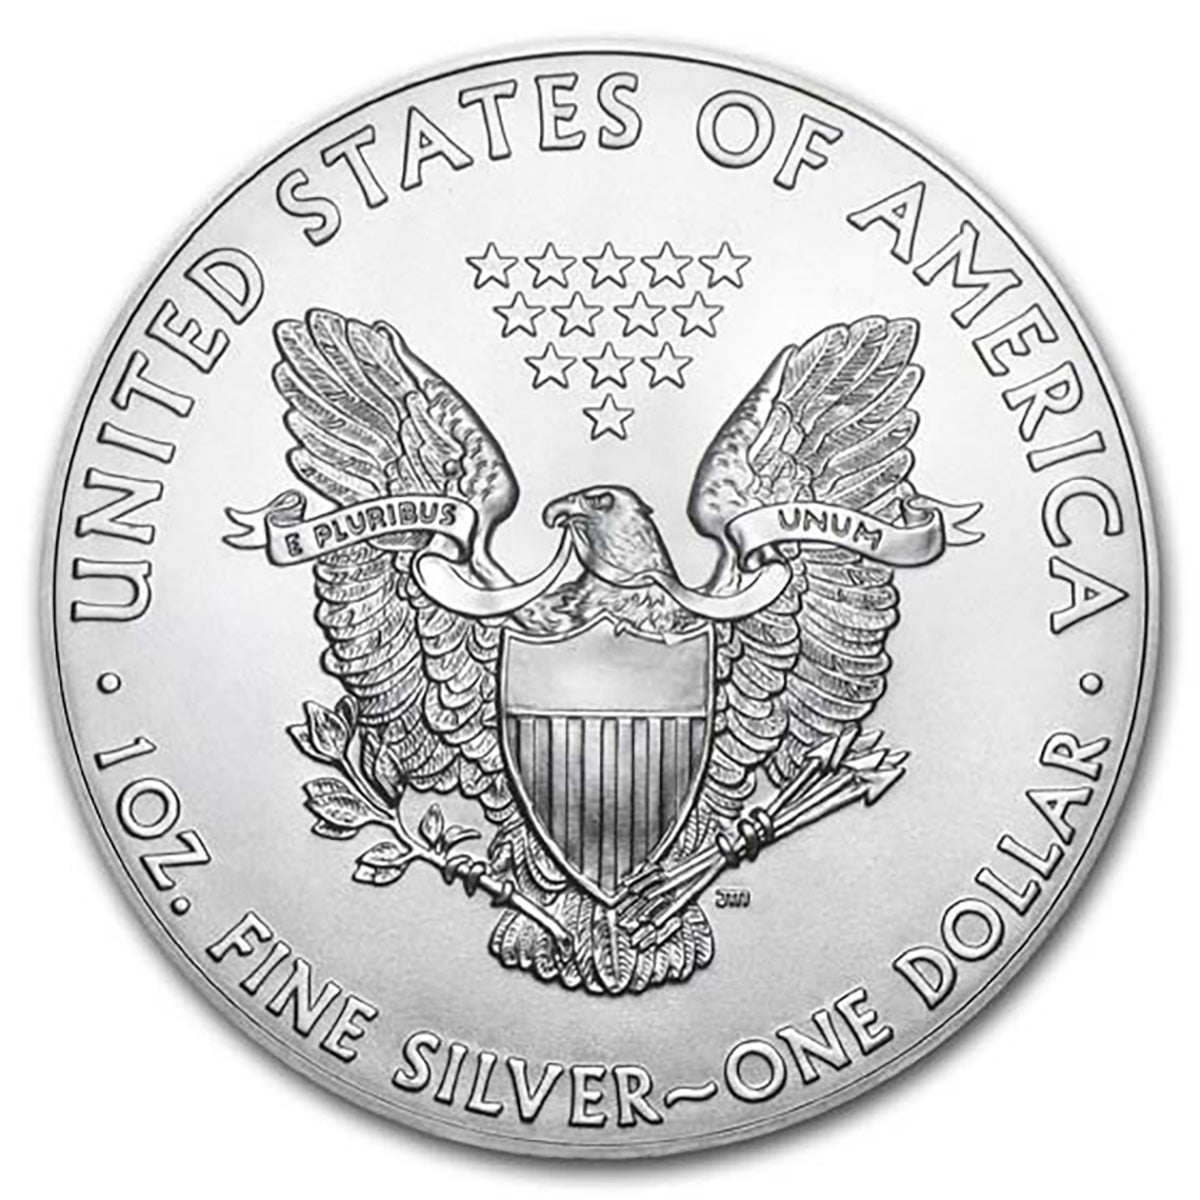 2020 1 oz American Silver Eagles Tube of 20 (Very Slightly Off Quality)